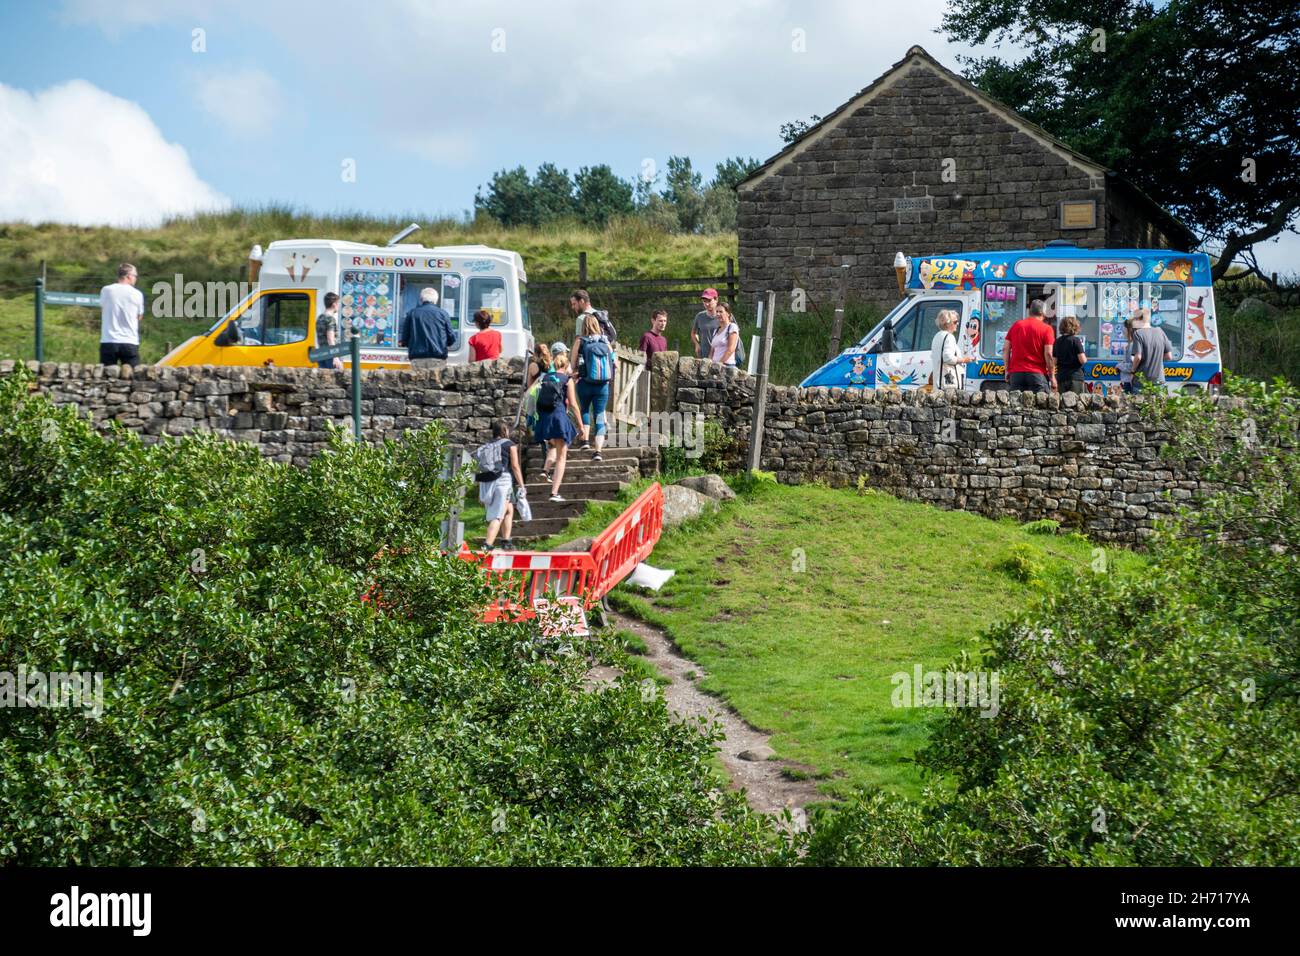 Derbyshire UK – 20 Aug 2020: Long queues are common at the popular ice cream van stop at Longshaw Estate, Peak District Stock Photo